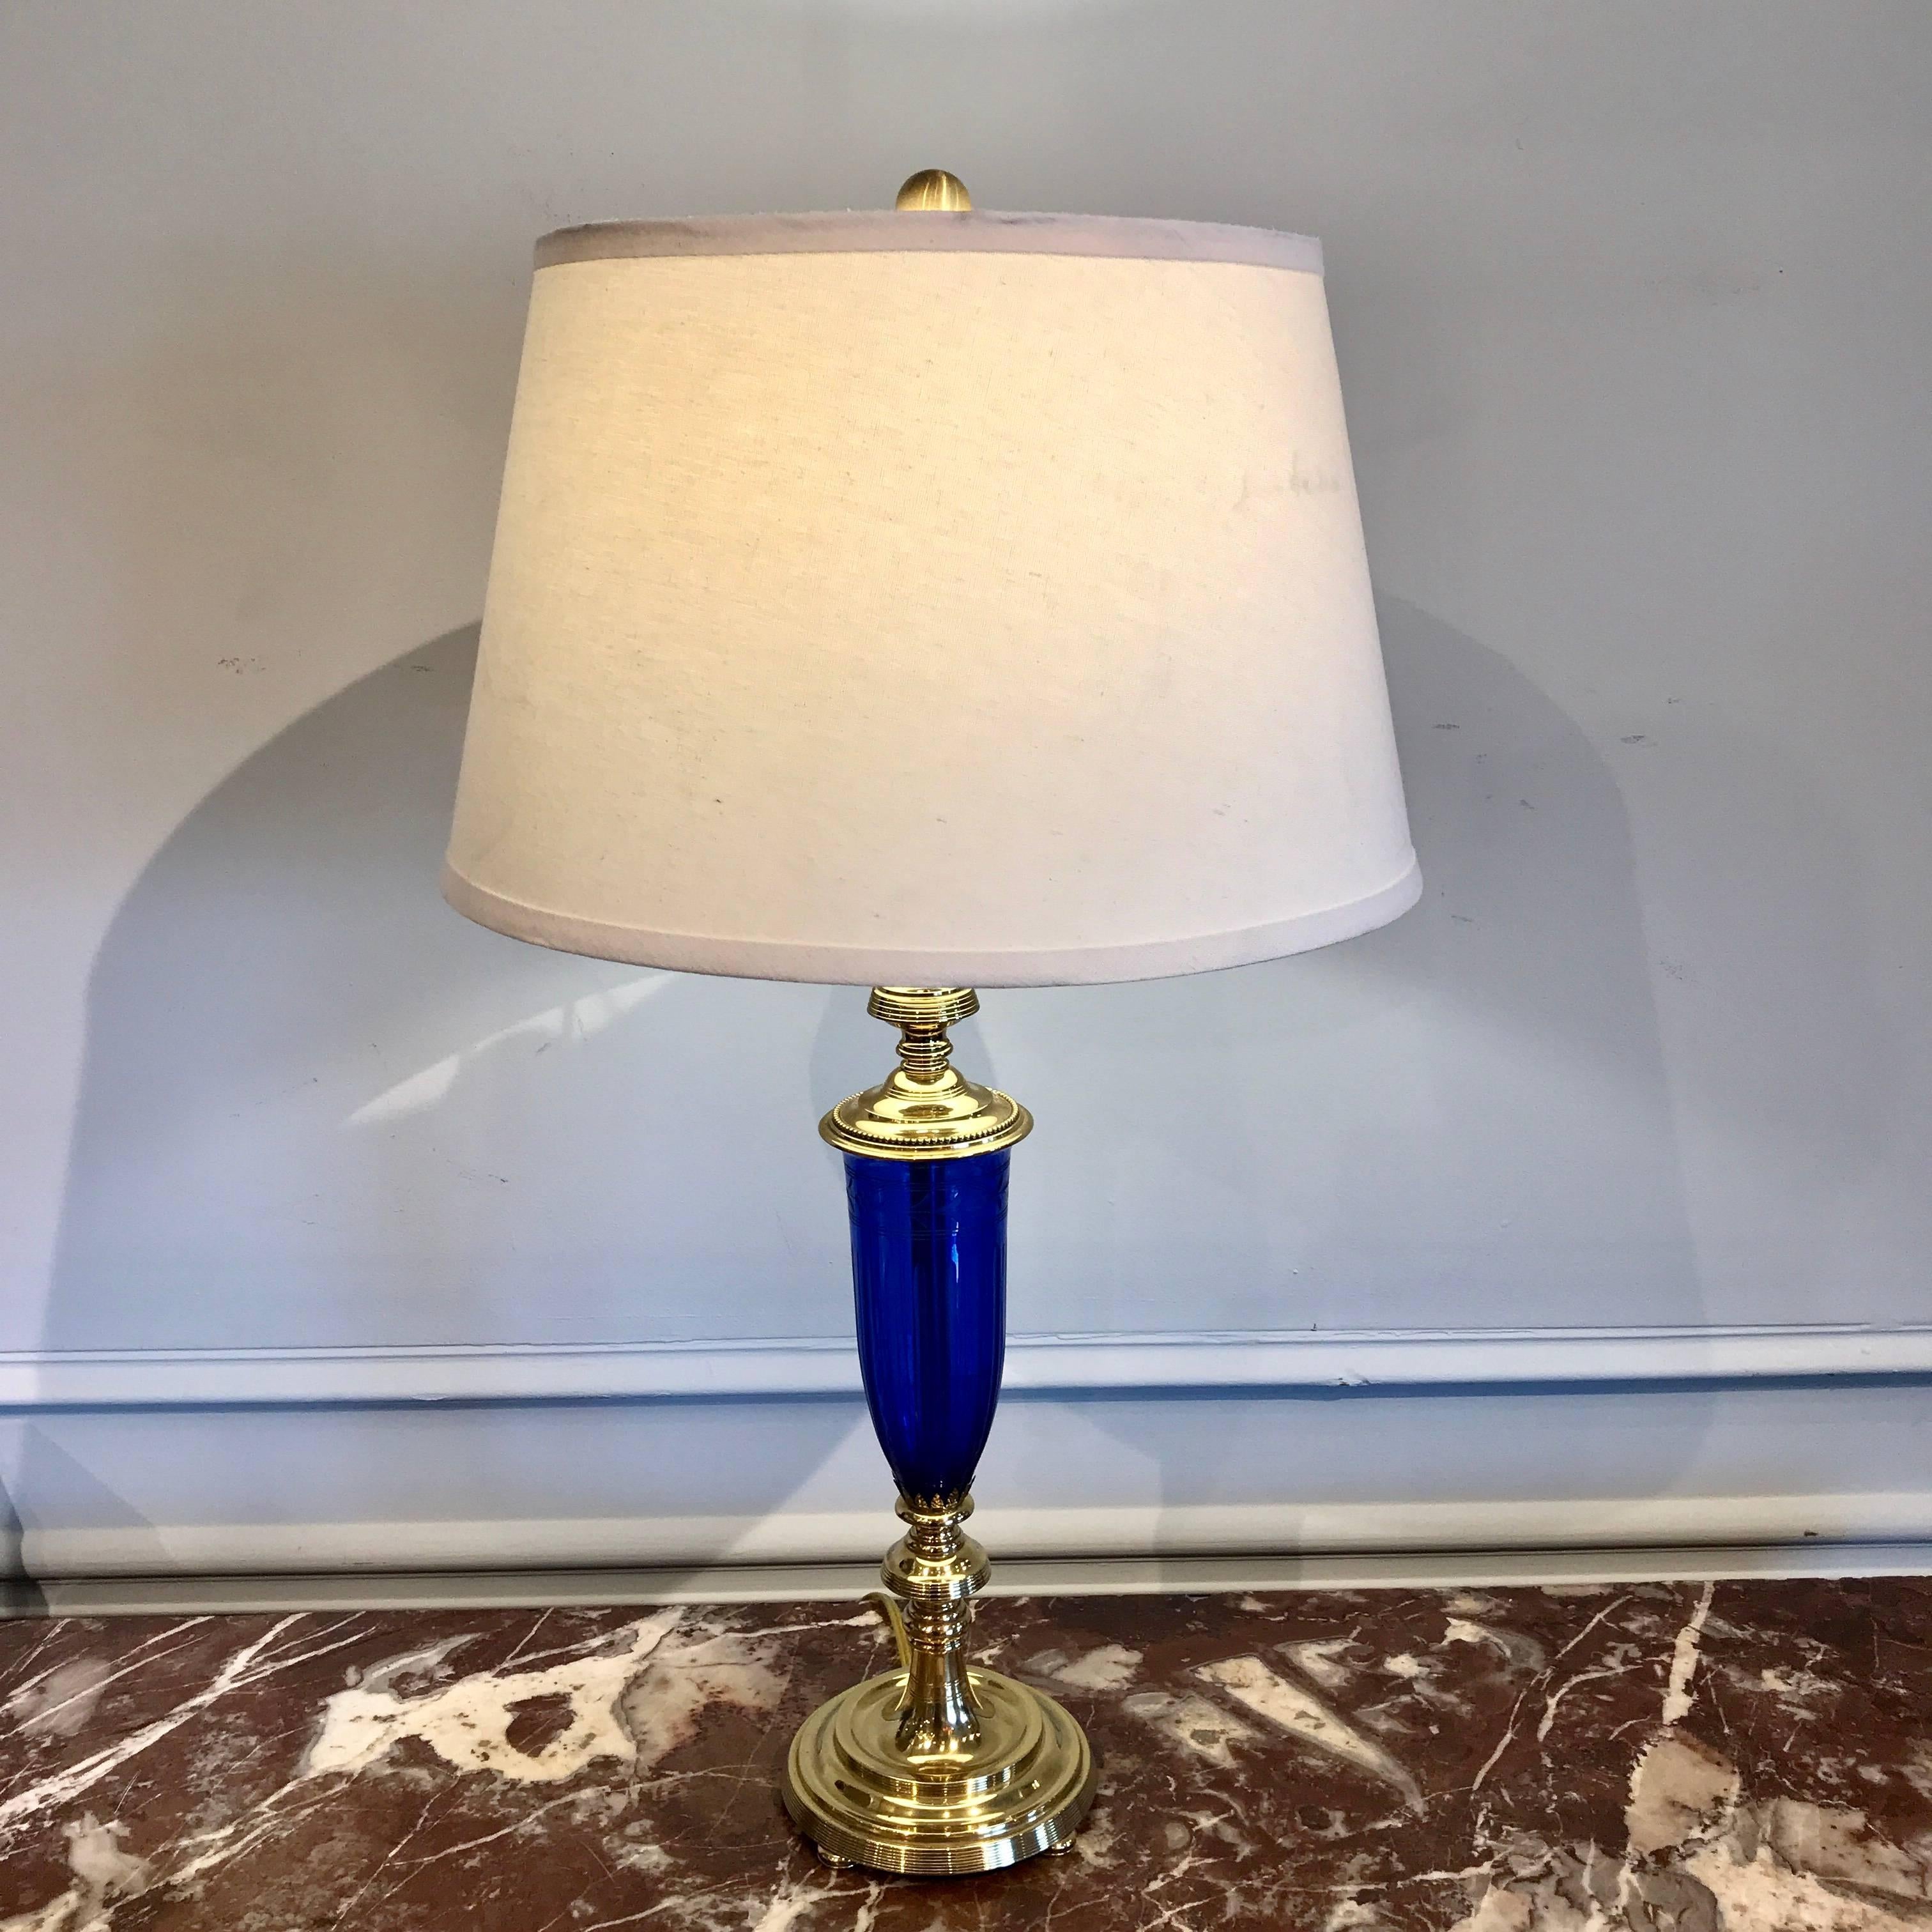 Pair of cobalt blue and brass-mounted urn lamps by Pairpoint, Each one with polished brass mounts, finely cut and engraved fluted cobalt blue urns. The lamp stands 19